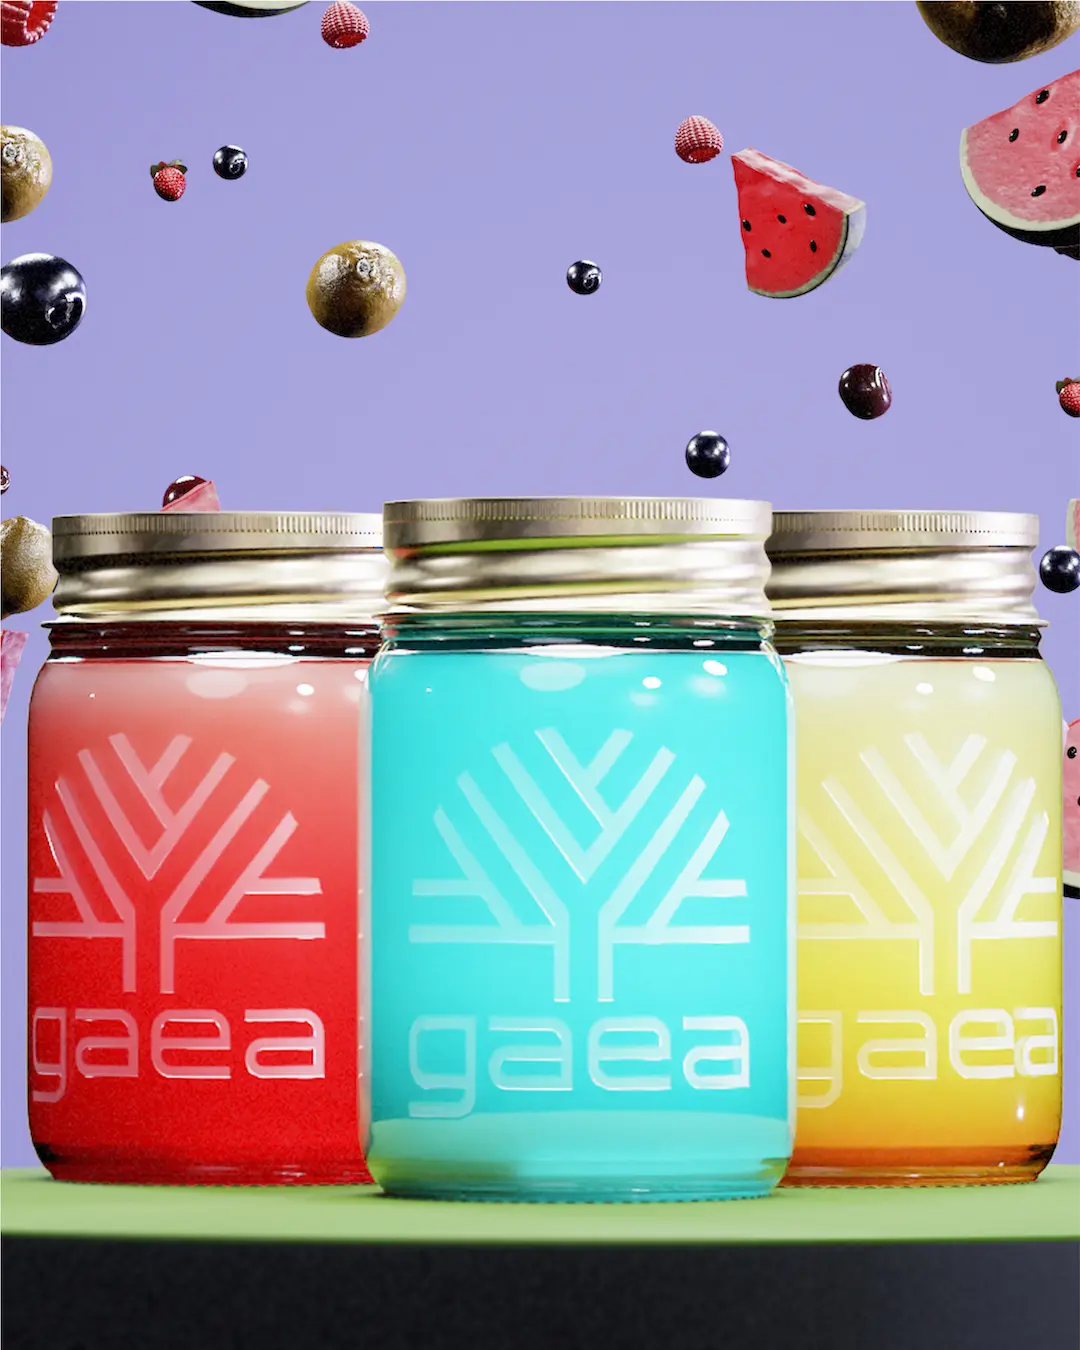 three gaea energy drinks in mason jars with a purple background filled with fruits.